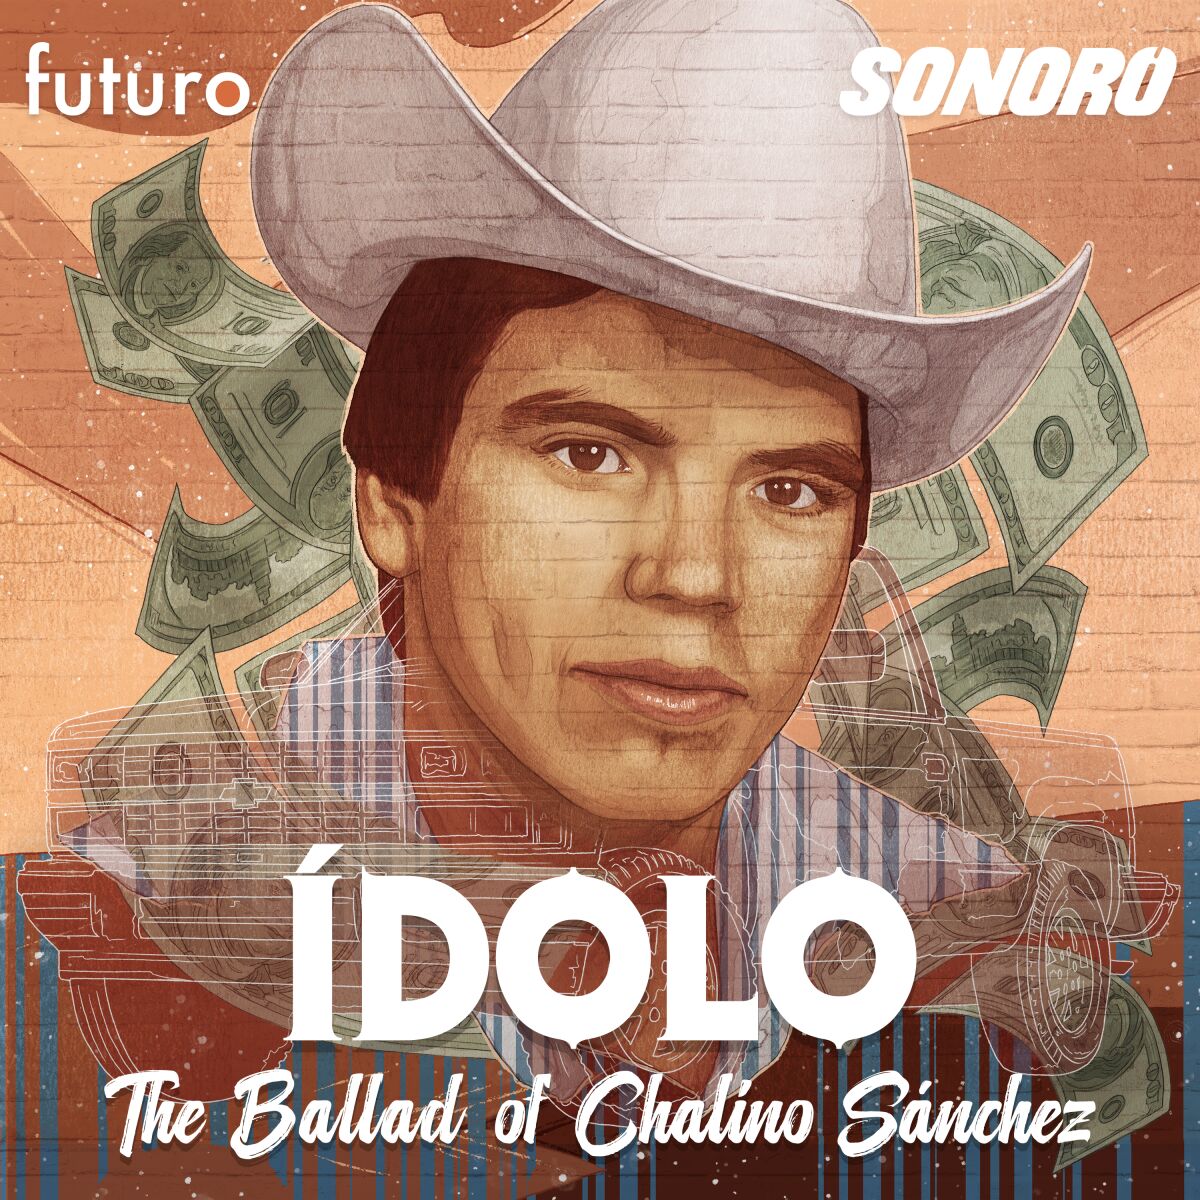 Artwork for podcast "Idolo: The Ballad of Chalino Sanchez" shows a man in a white cowboy hat with money floating behind him.